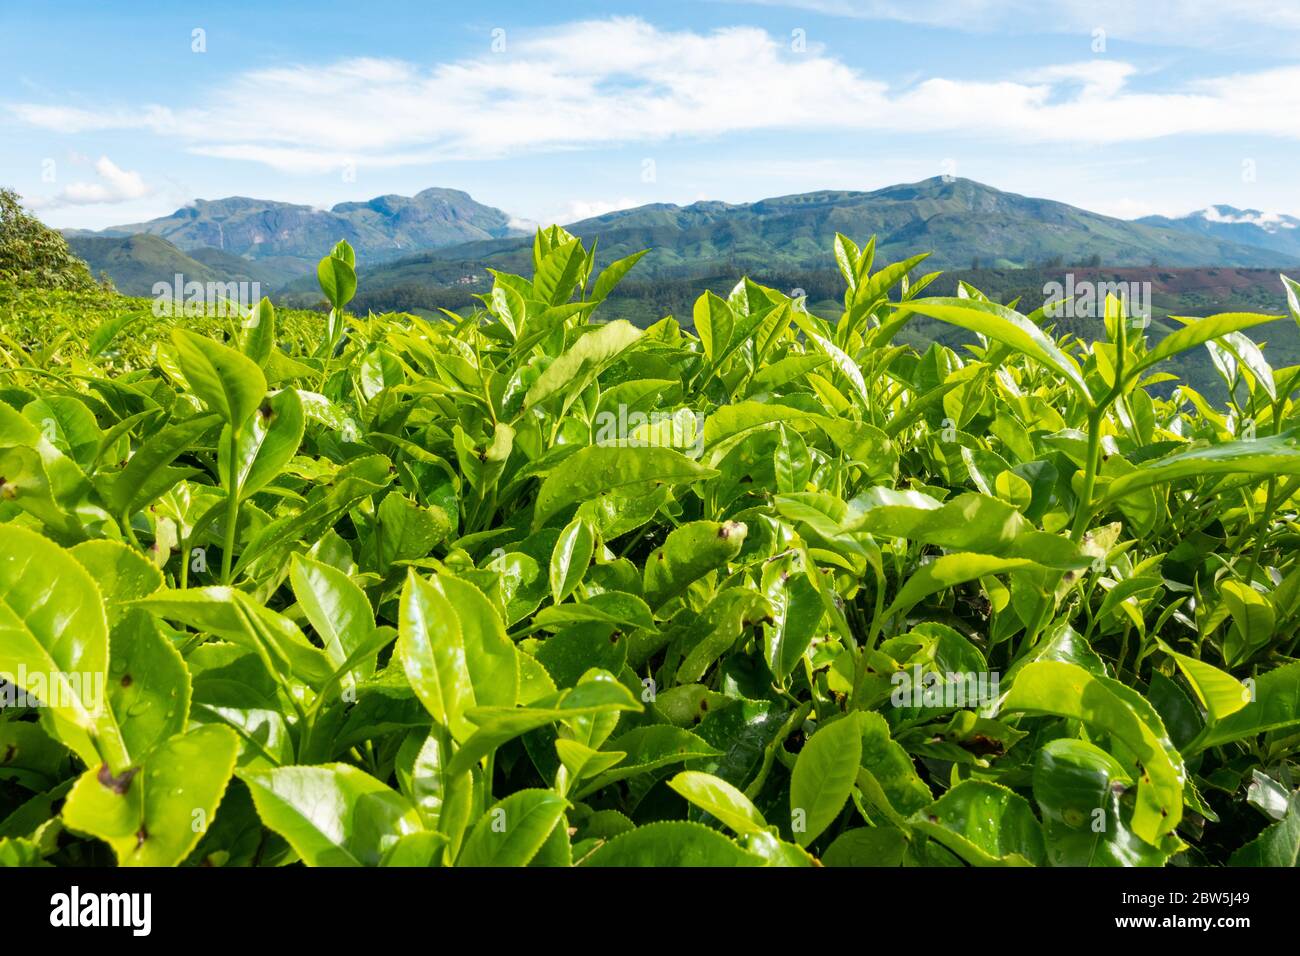 The view amongst the tea shrubs high in the hills of Munnar, Kerala, India, Stock Photo